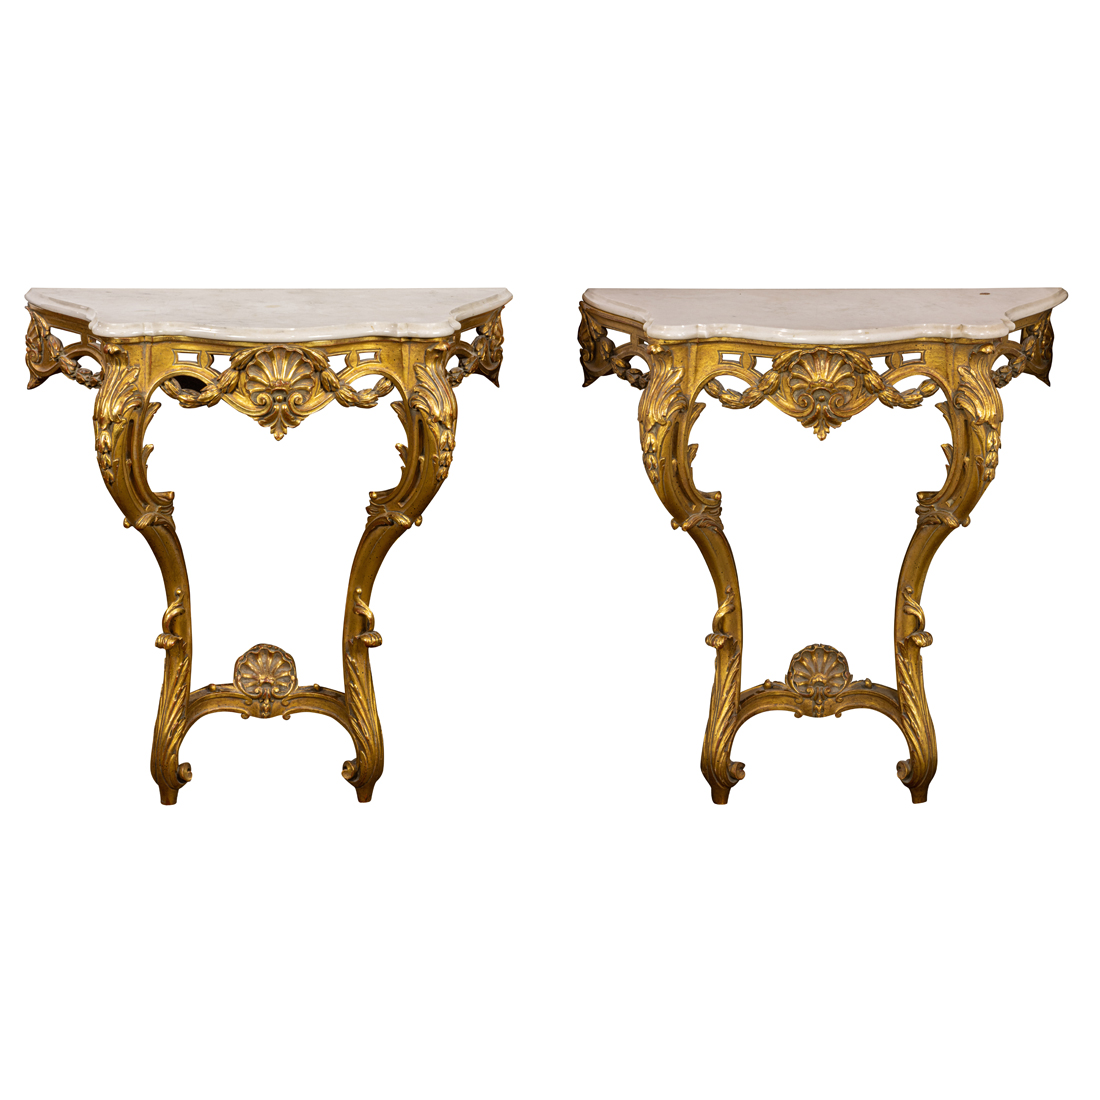 A PAIR OF ROCOCO STYLE GILTWOOD 3ce1bd